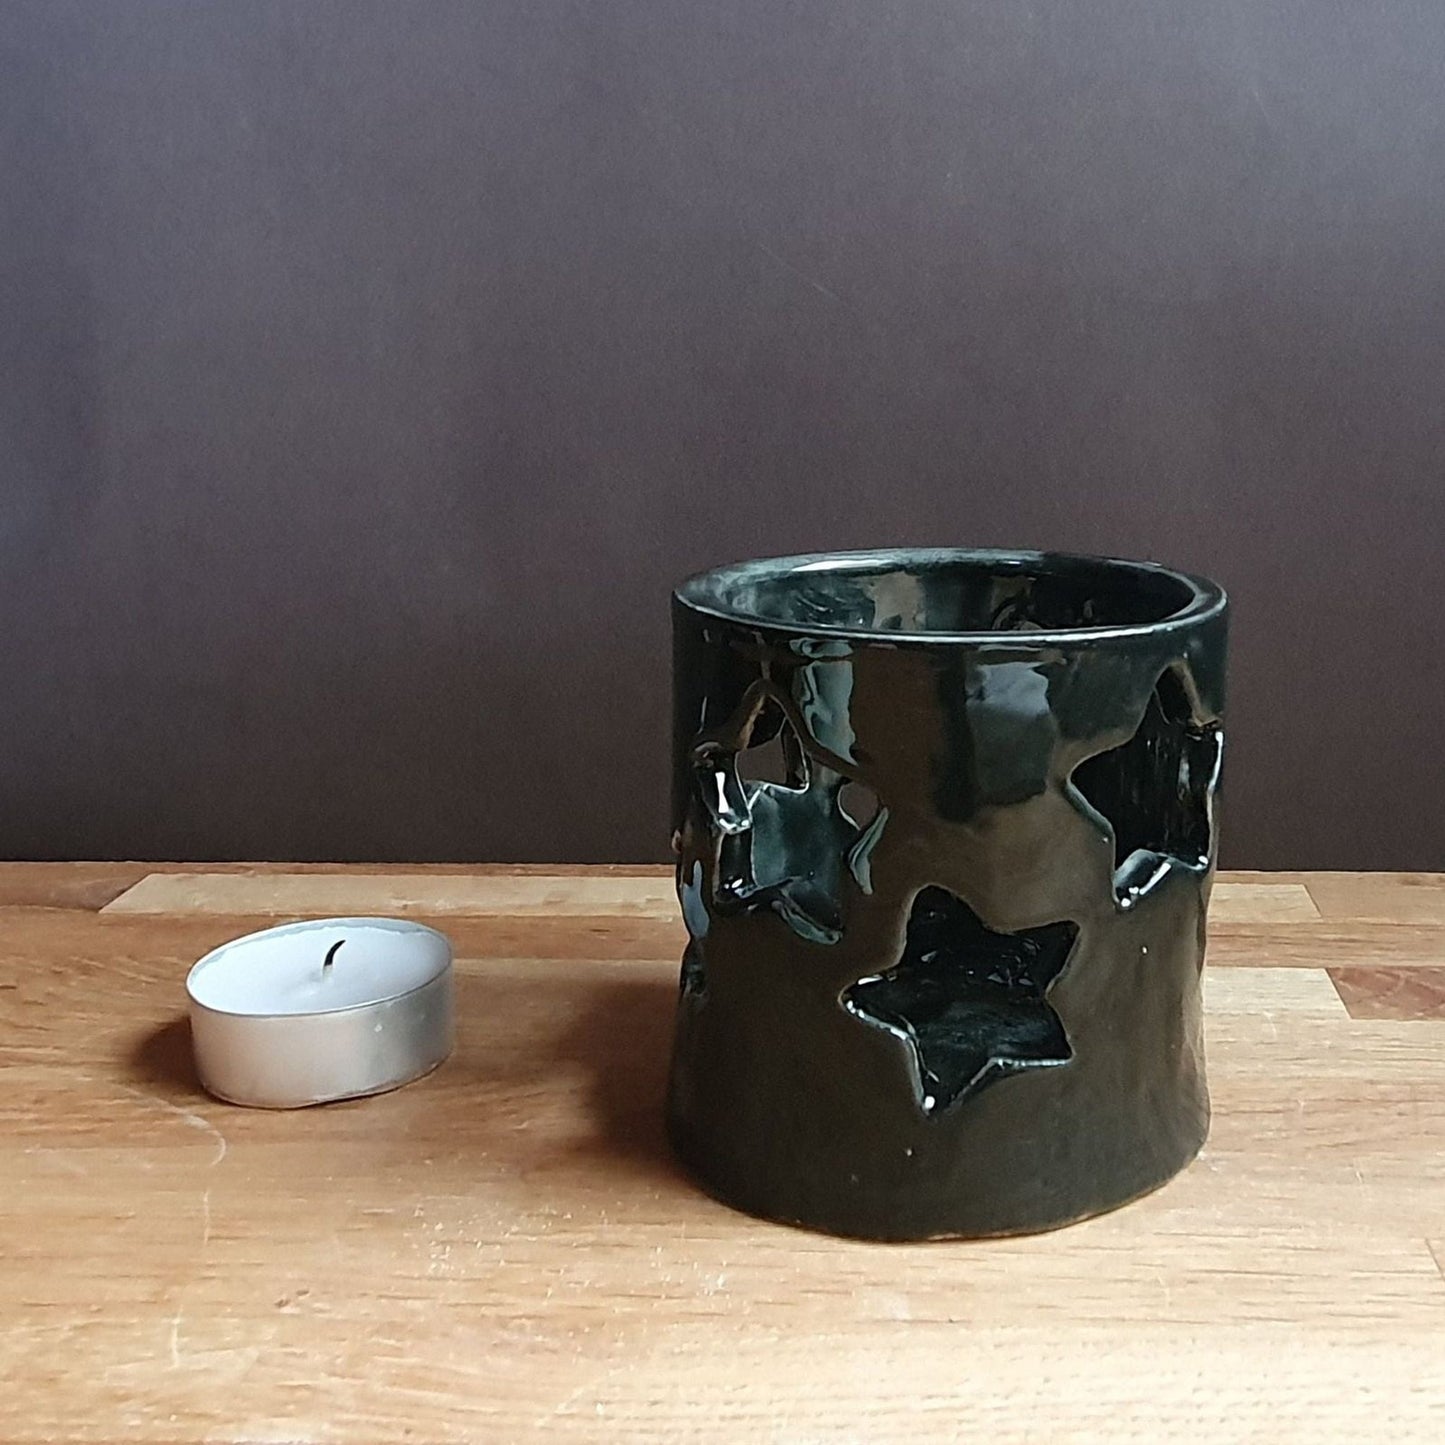 Tealight lantern - with star silhouettes